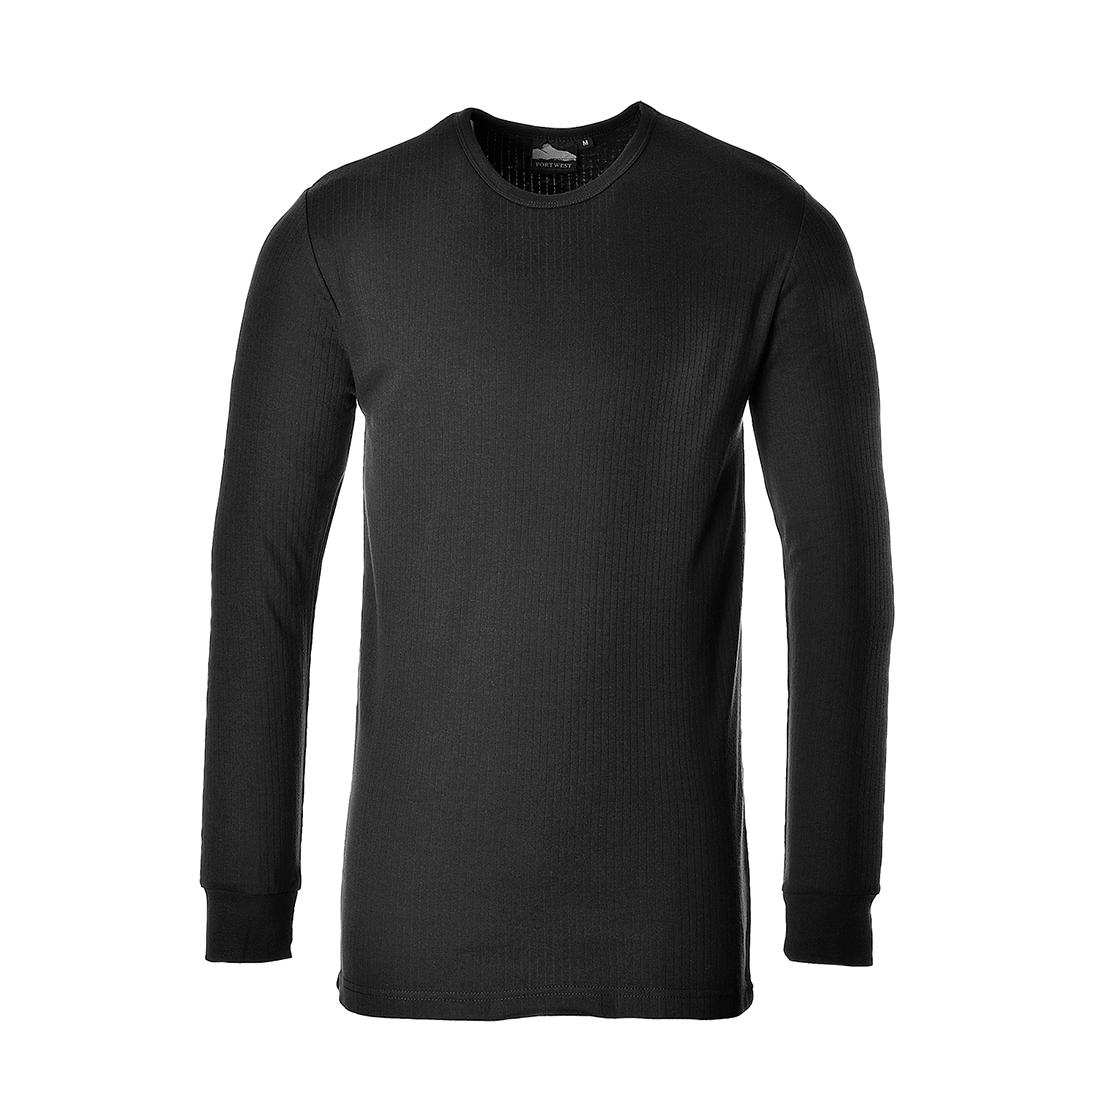 Example image of the long-sleeved thermal shirt B123 in black with a link to the article.